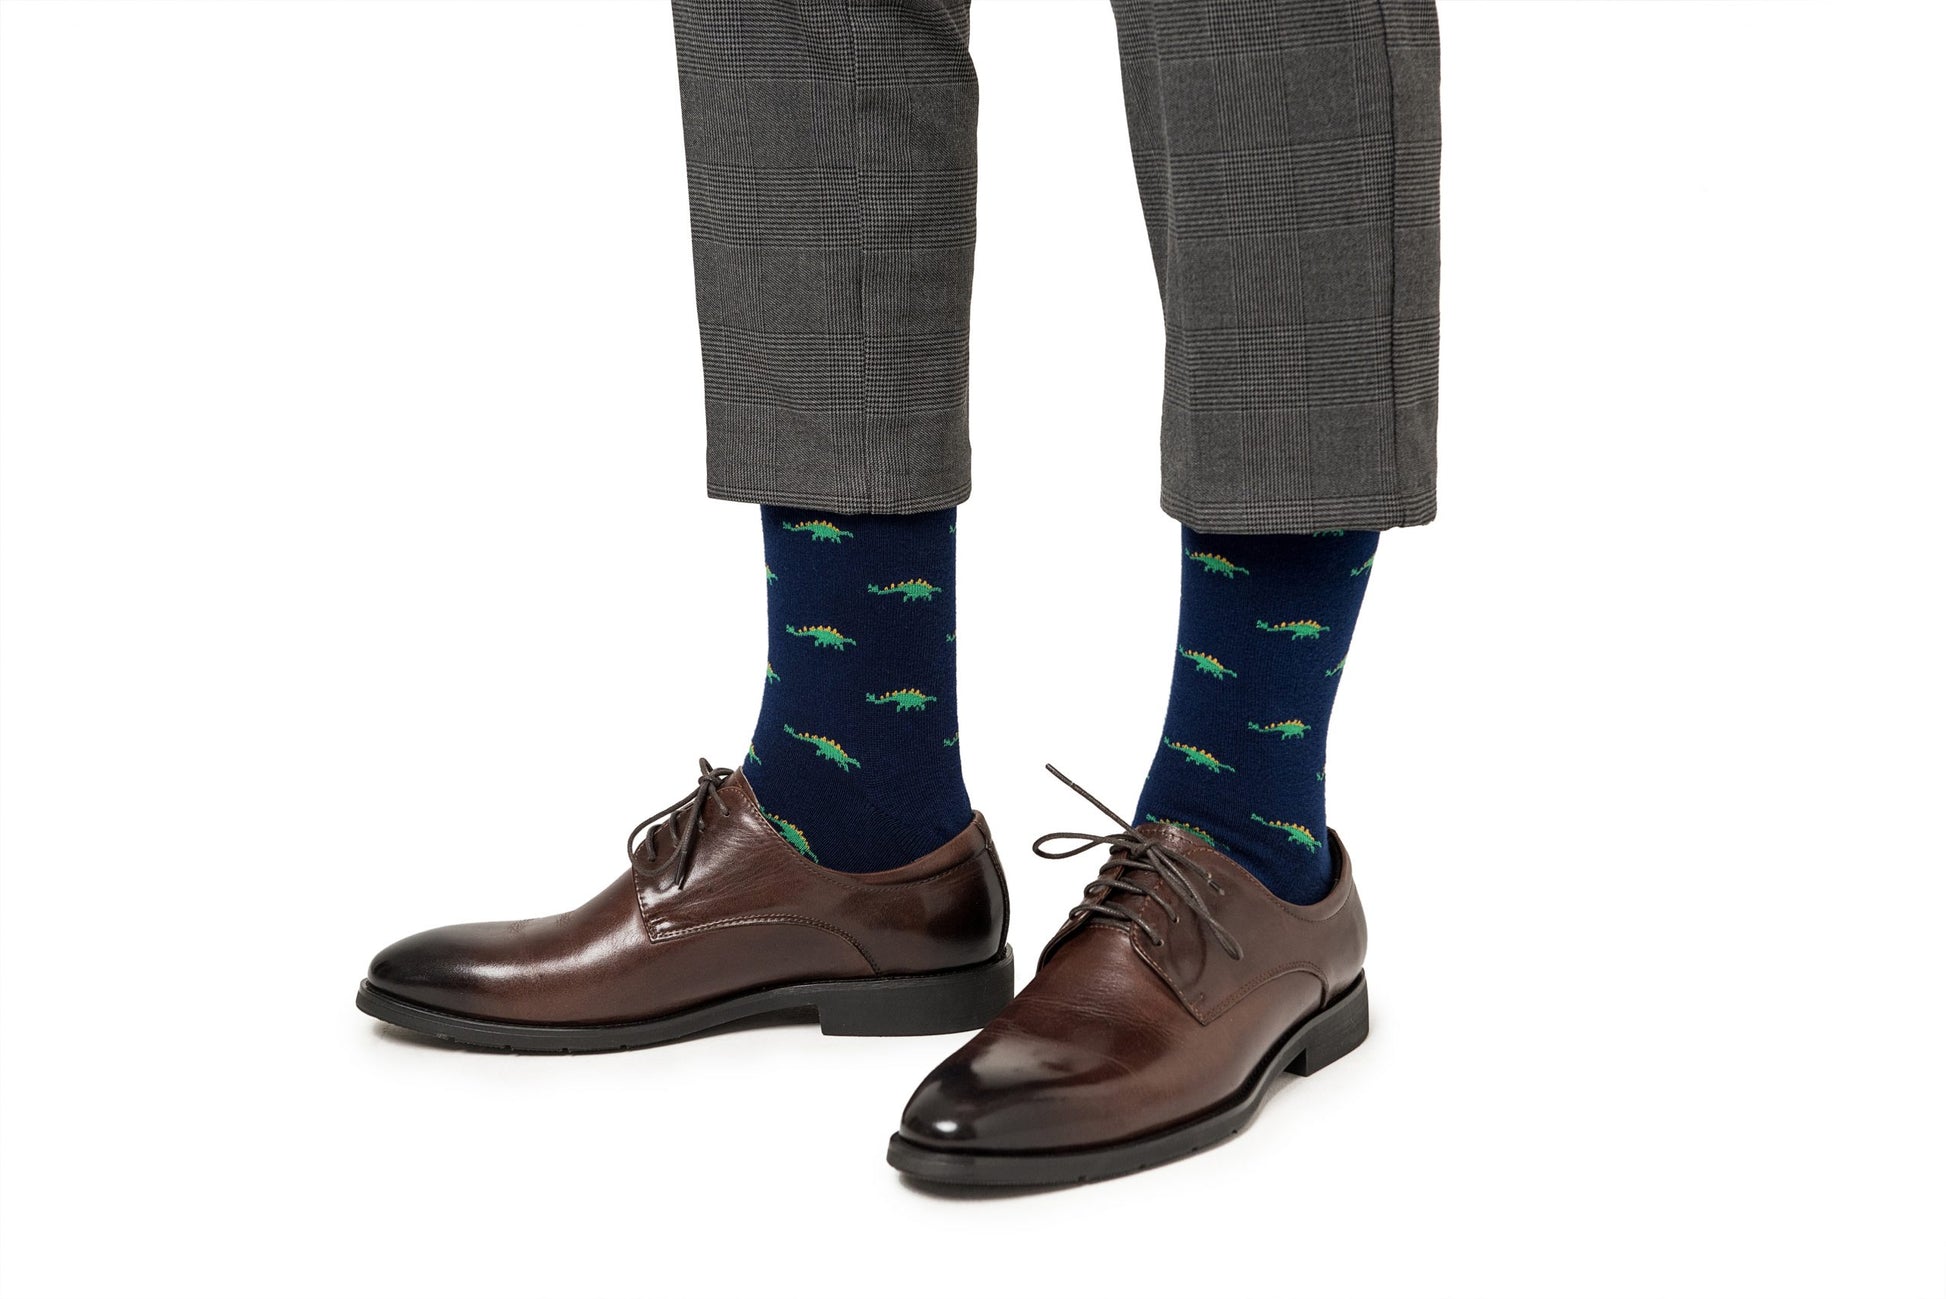 A person standing in brown dress shoes and Stegosaurus Socks with whimsical green alligator patterns, against a white background.